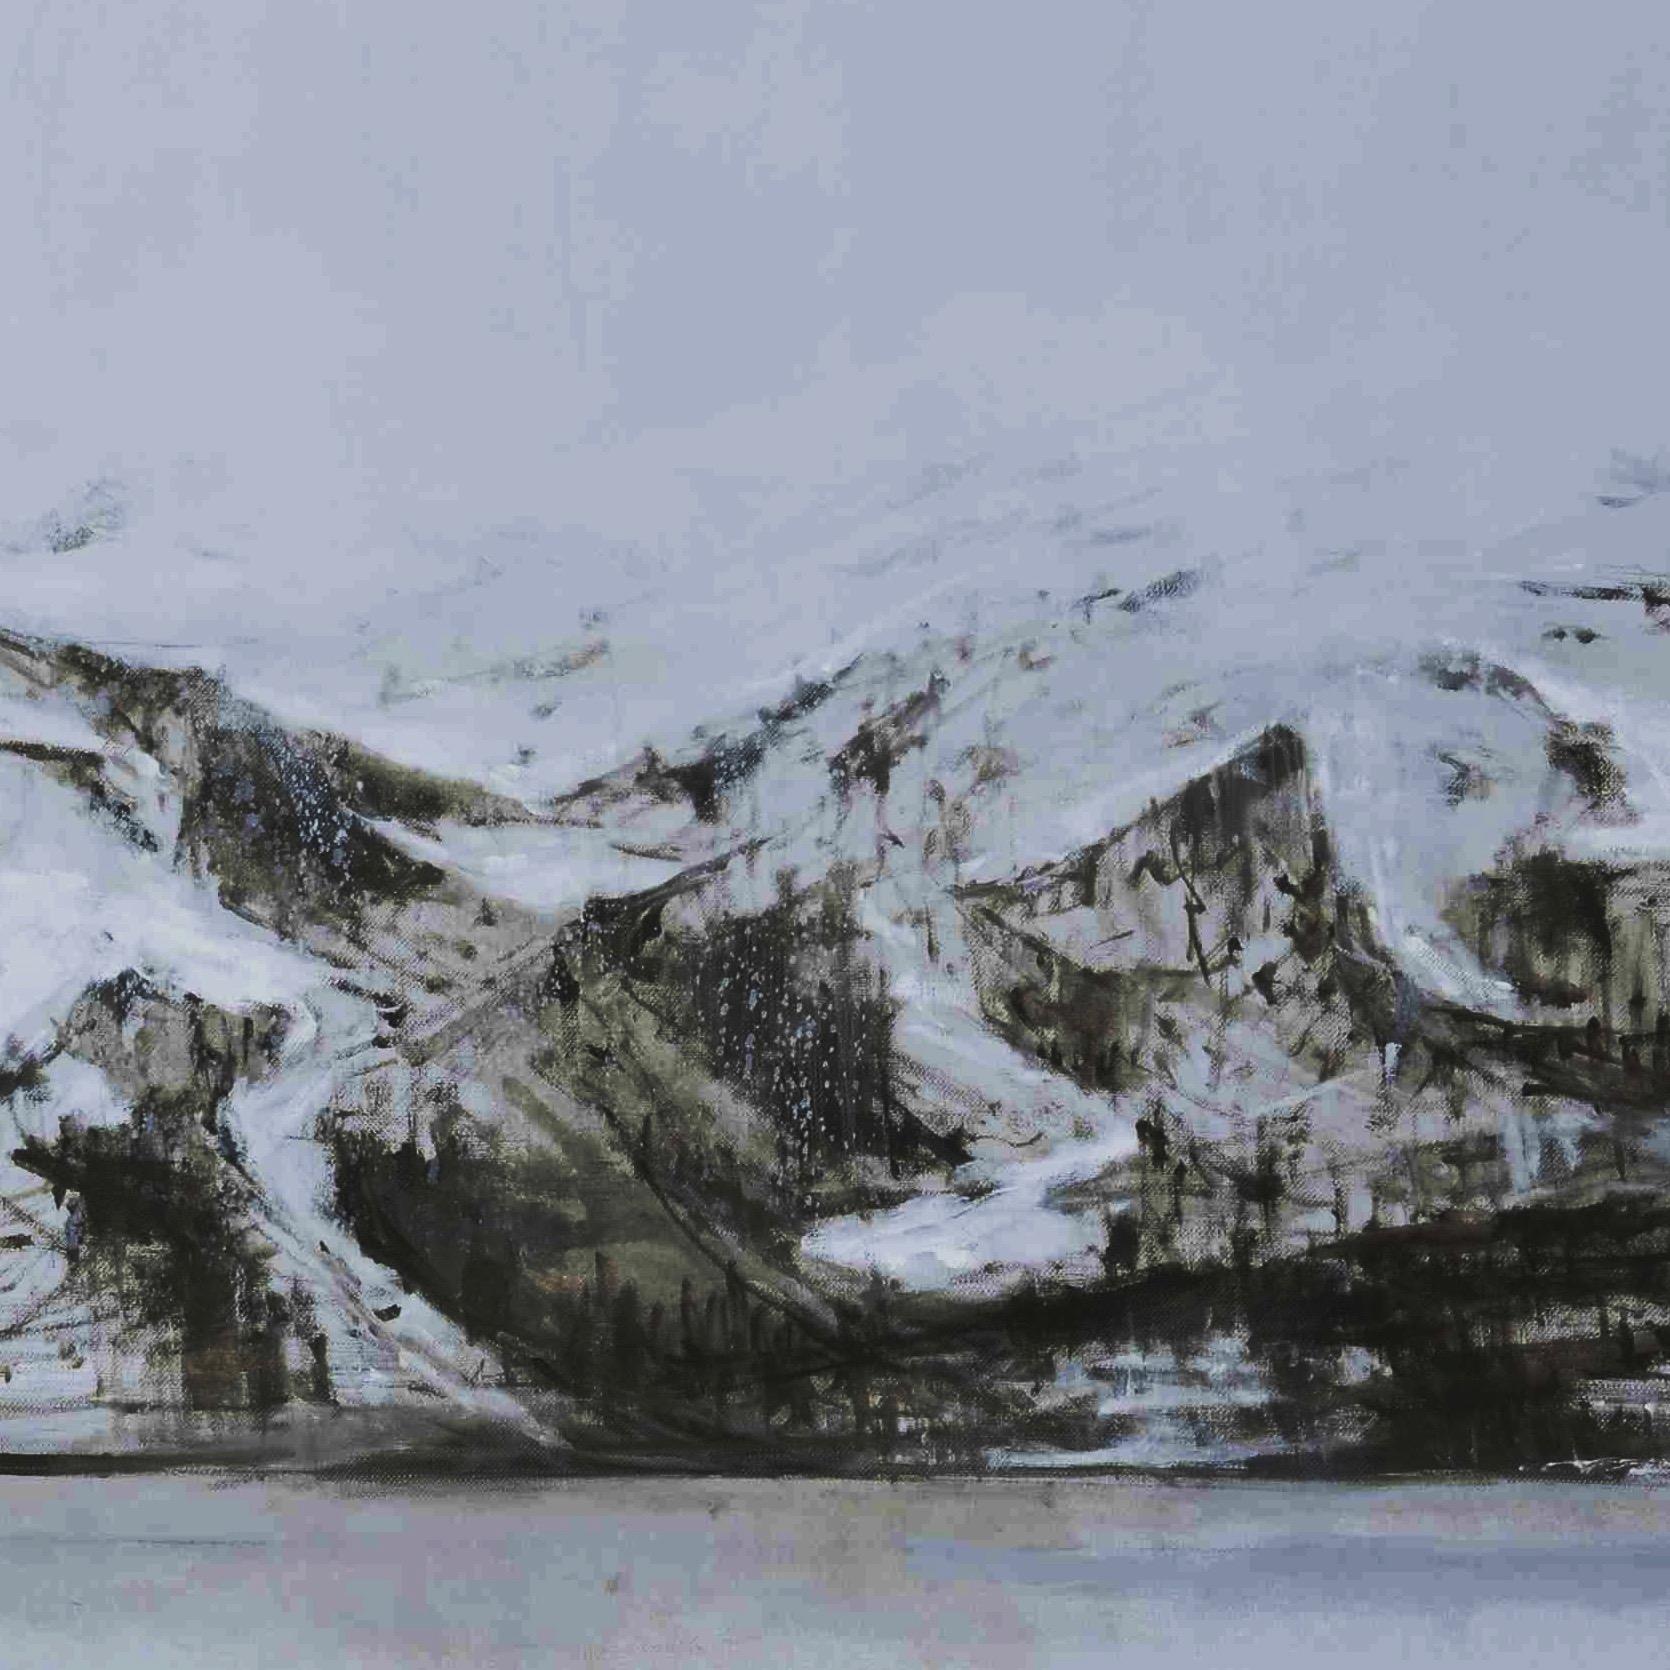 Hardangervidda #3 by Calo Carratalá - Landscape painting, snowy mountain, winter For Sale 2